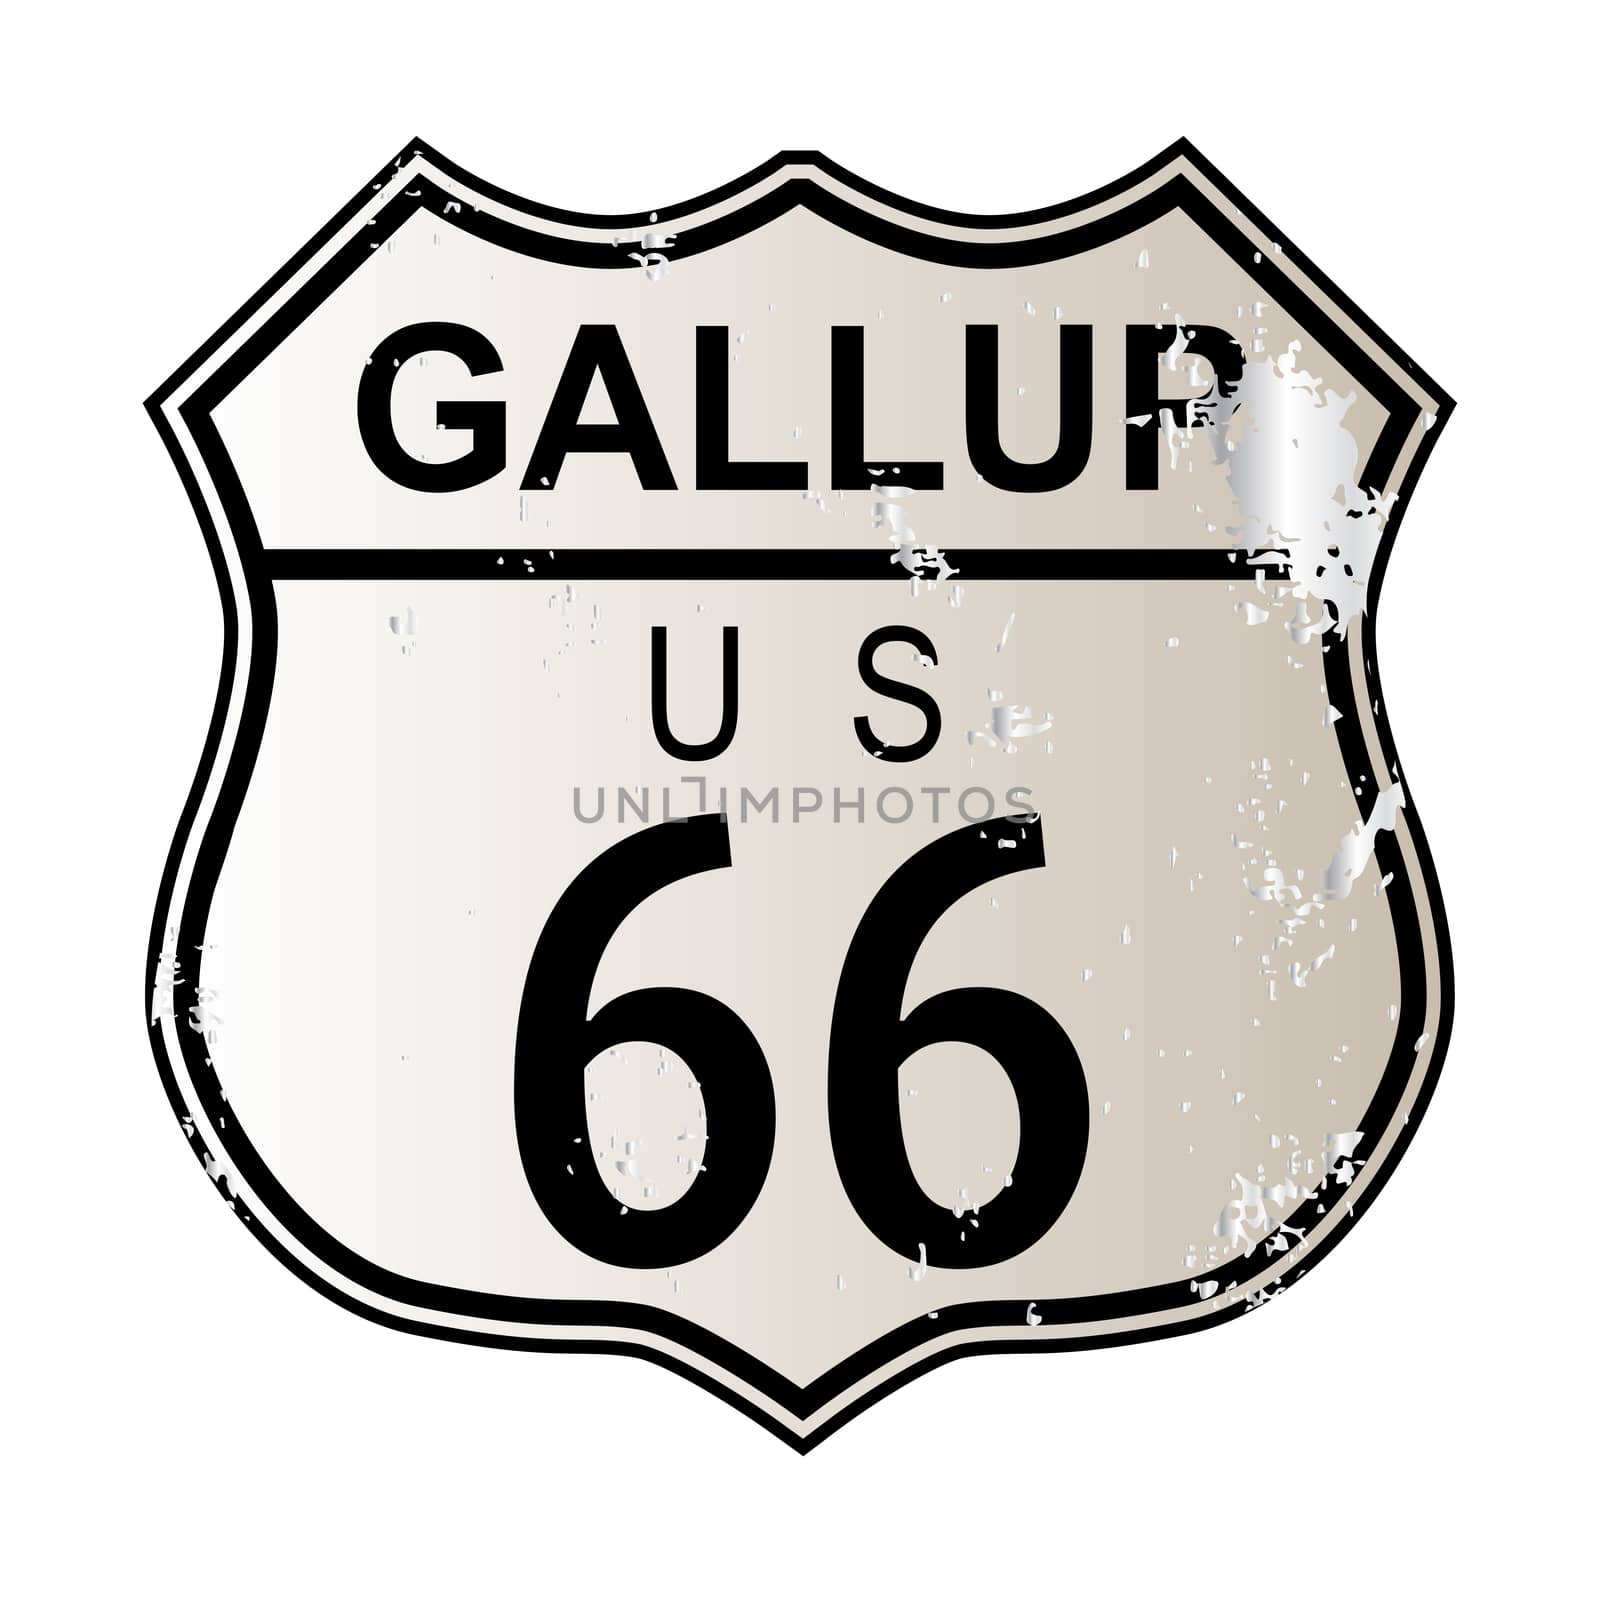 Gallup Route 66 traffic sign over a white background and the legend ROUTE US 66